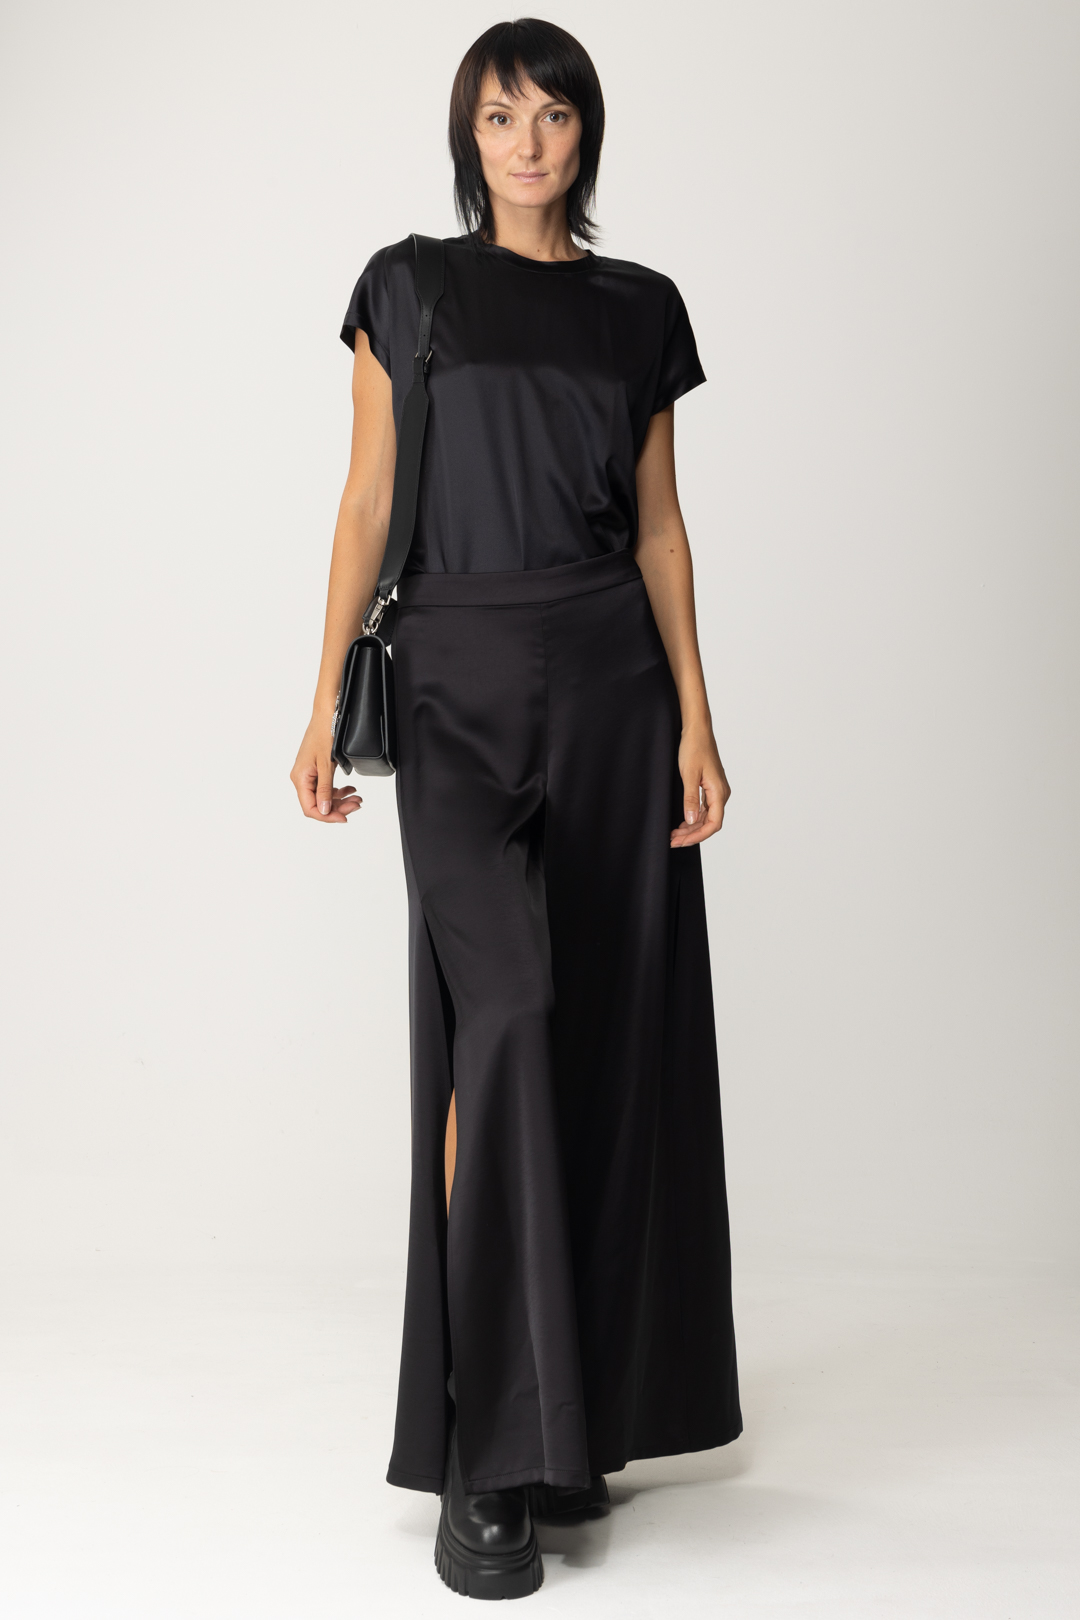 Preview: Pinko Wide leg trousers with side slits NERO LIMOUSINE